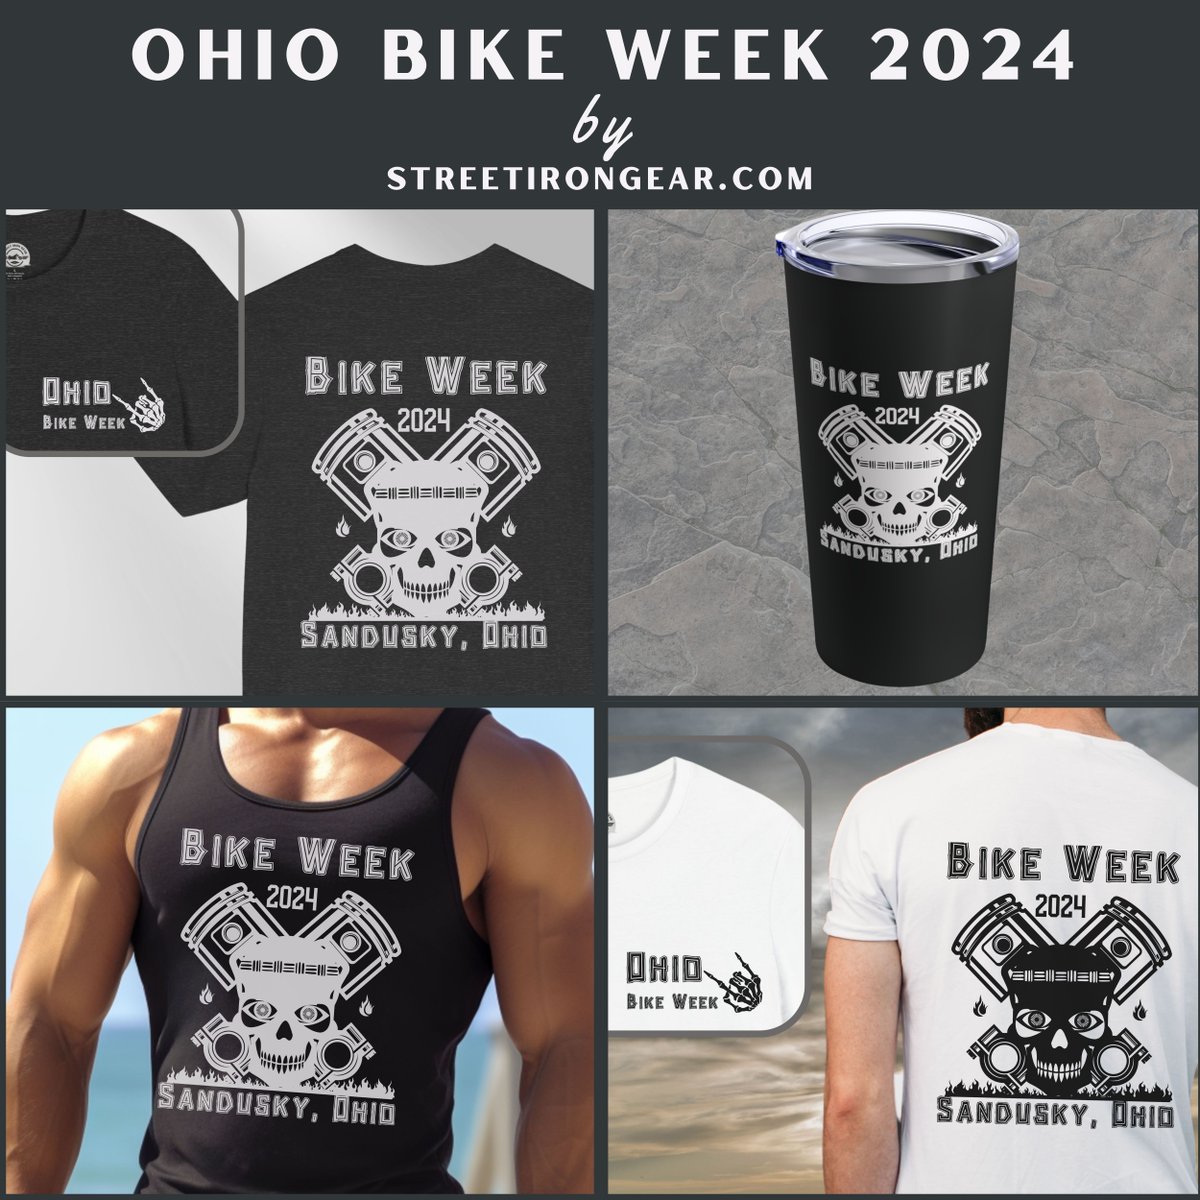 Ready to ride out for Ohio Bike Week 2024 🏍️💀 Check out our killer Tiki Skull collection featuring the coolest Tees, Tanks, and Travel Mugs.

#OhioBikeWeek2024 #TikiSkull #MotorcycleLife #BikerGear #RideInStyle #AdventureAwaits #StreetIronGear 

Shop Now!
buff.ly/4aKTZzc